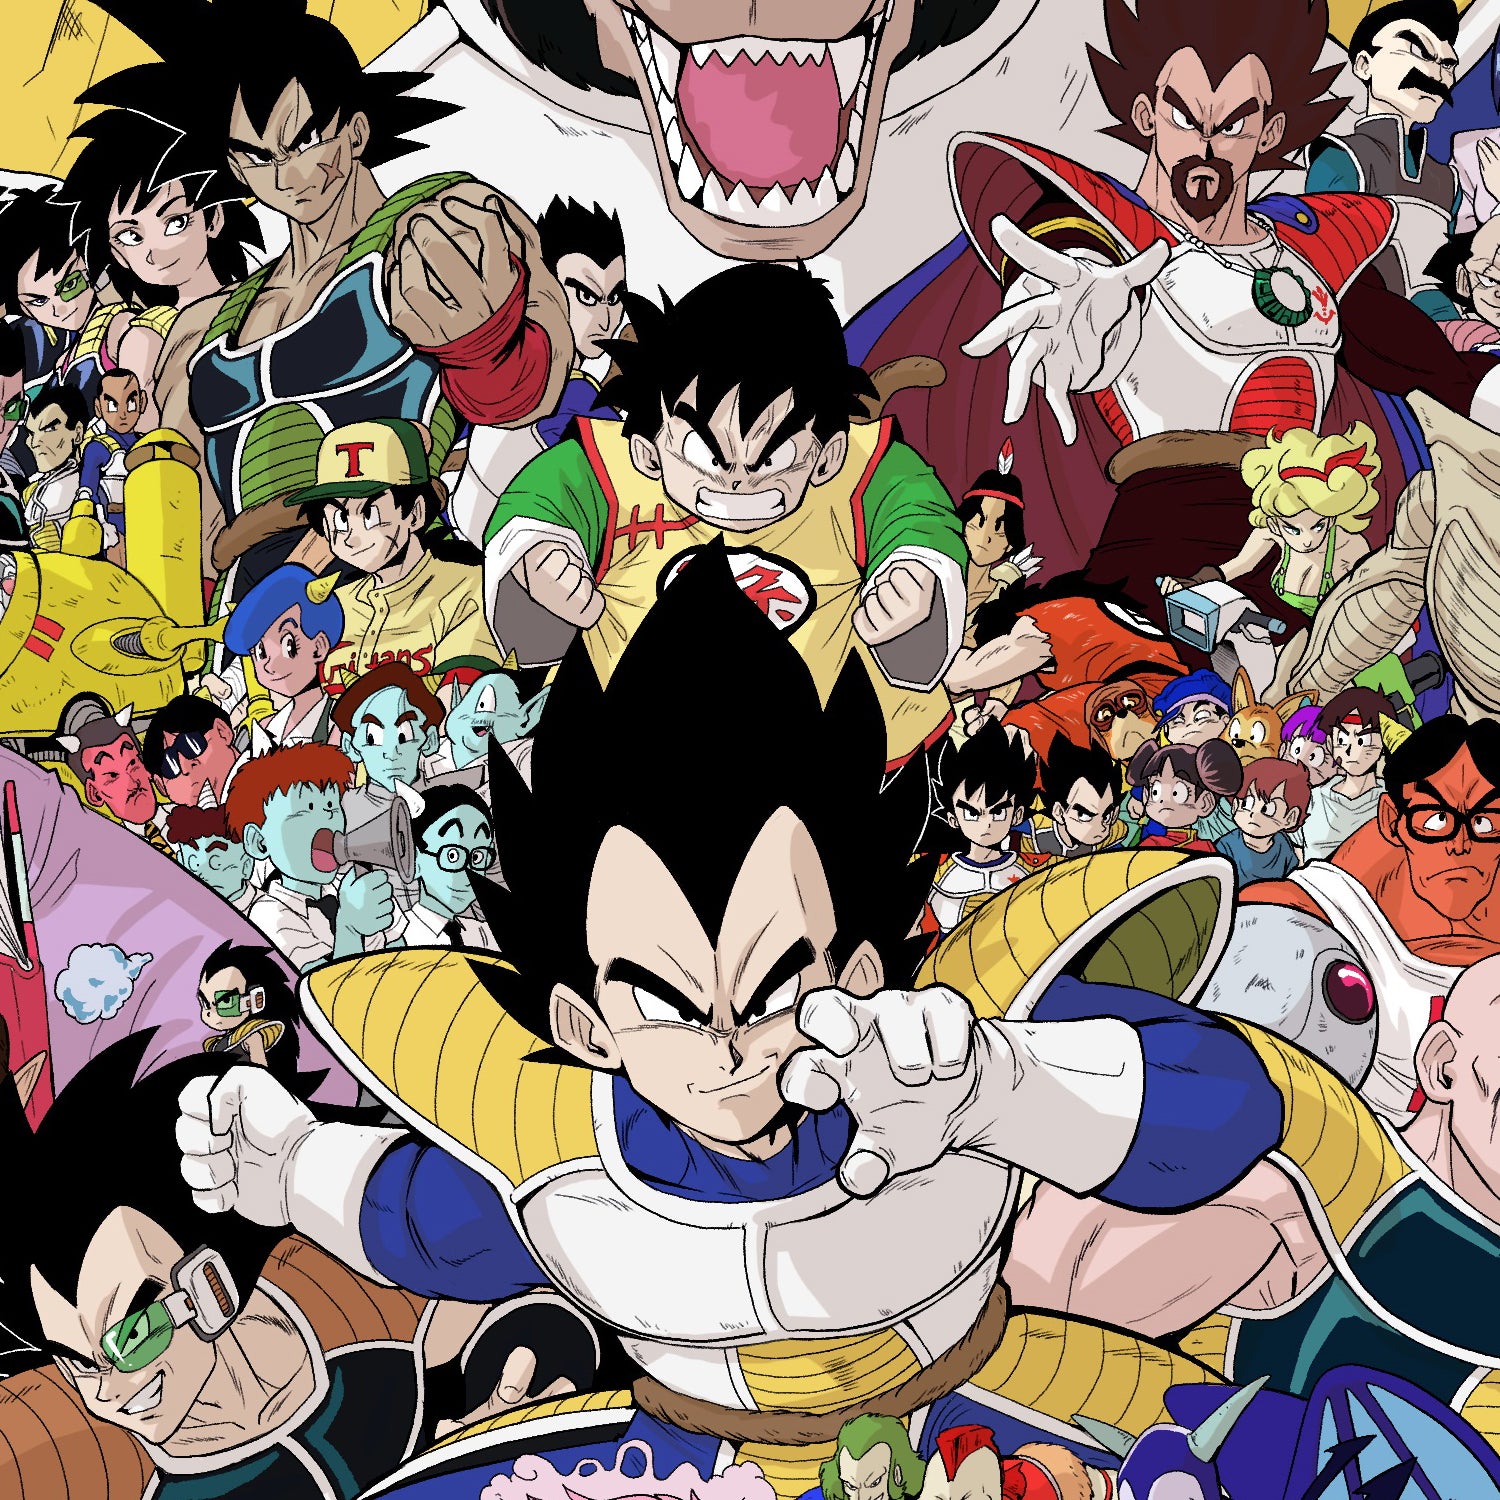 Every Dragon Ball Character, Together